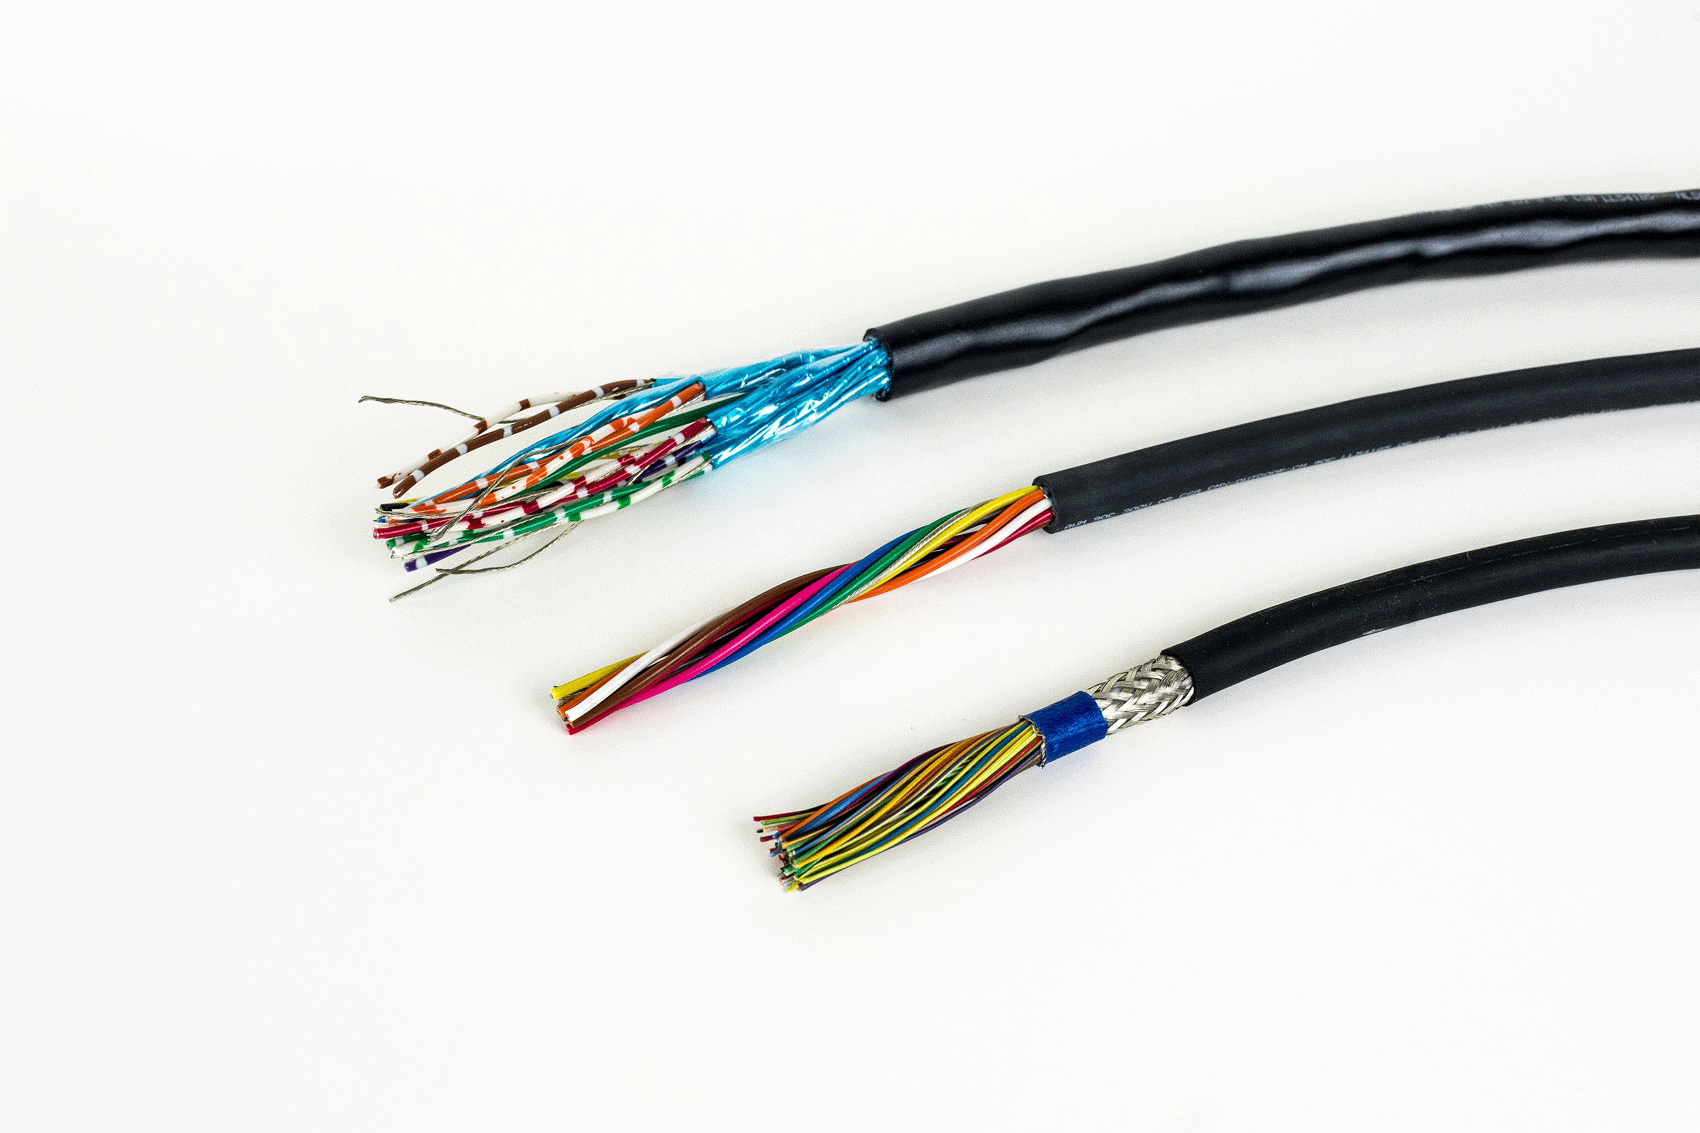 3 technical cables